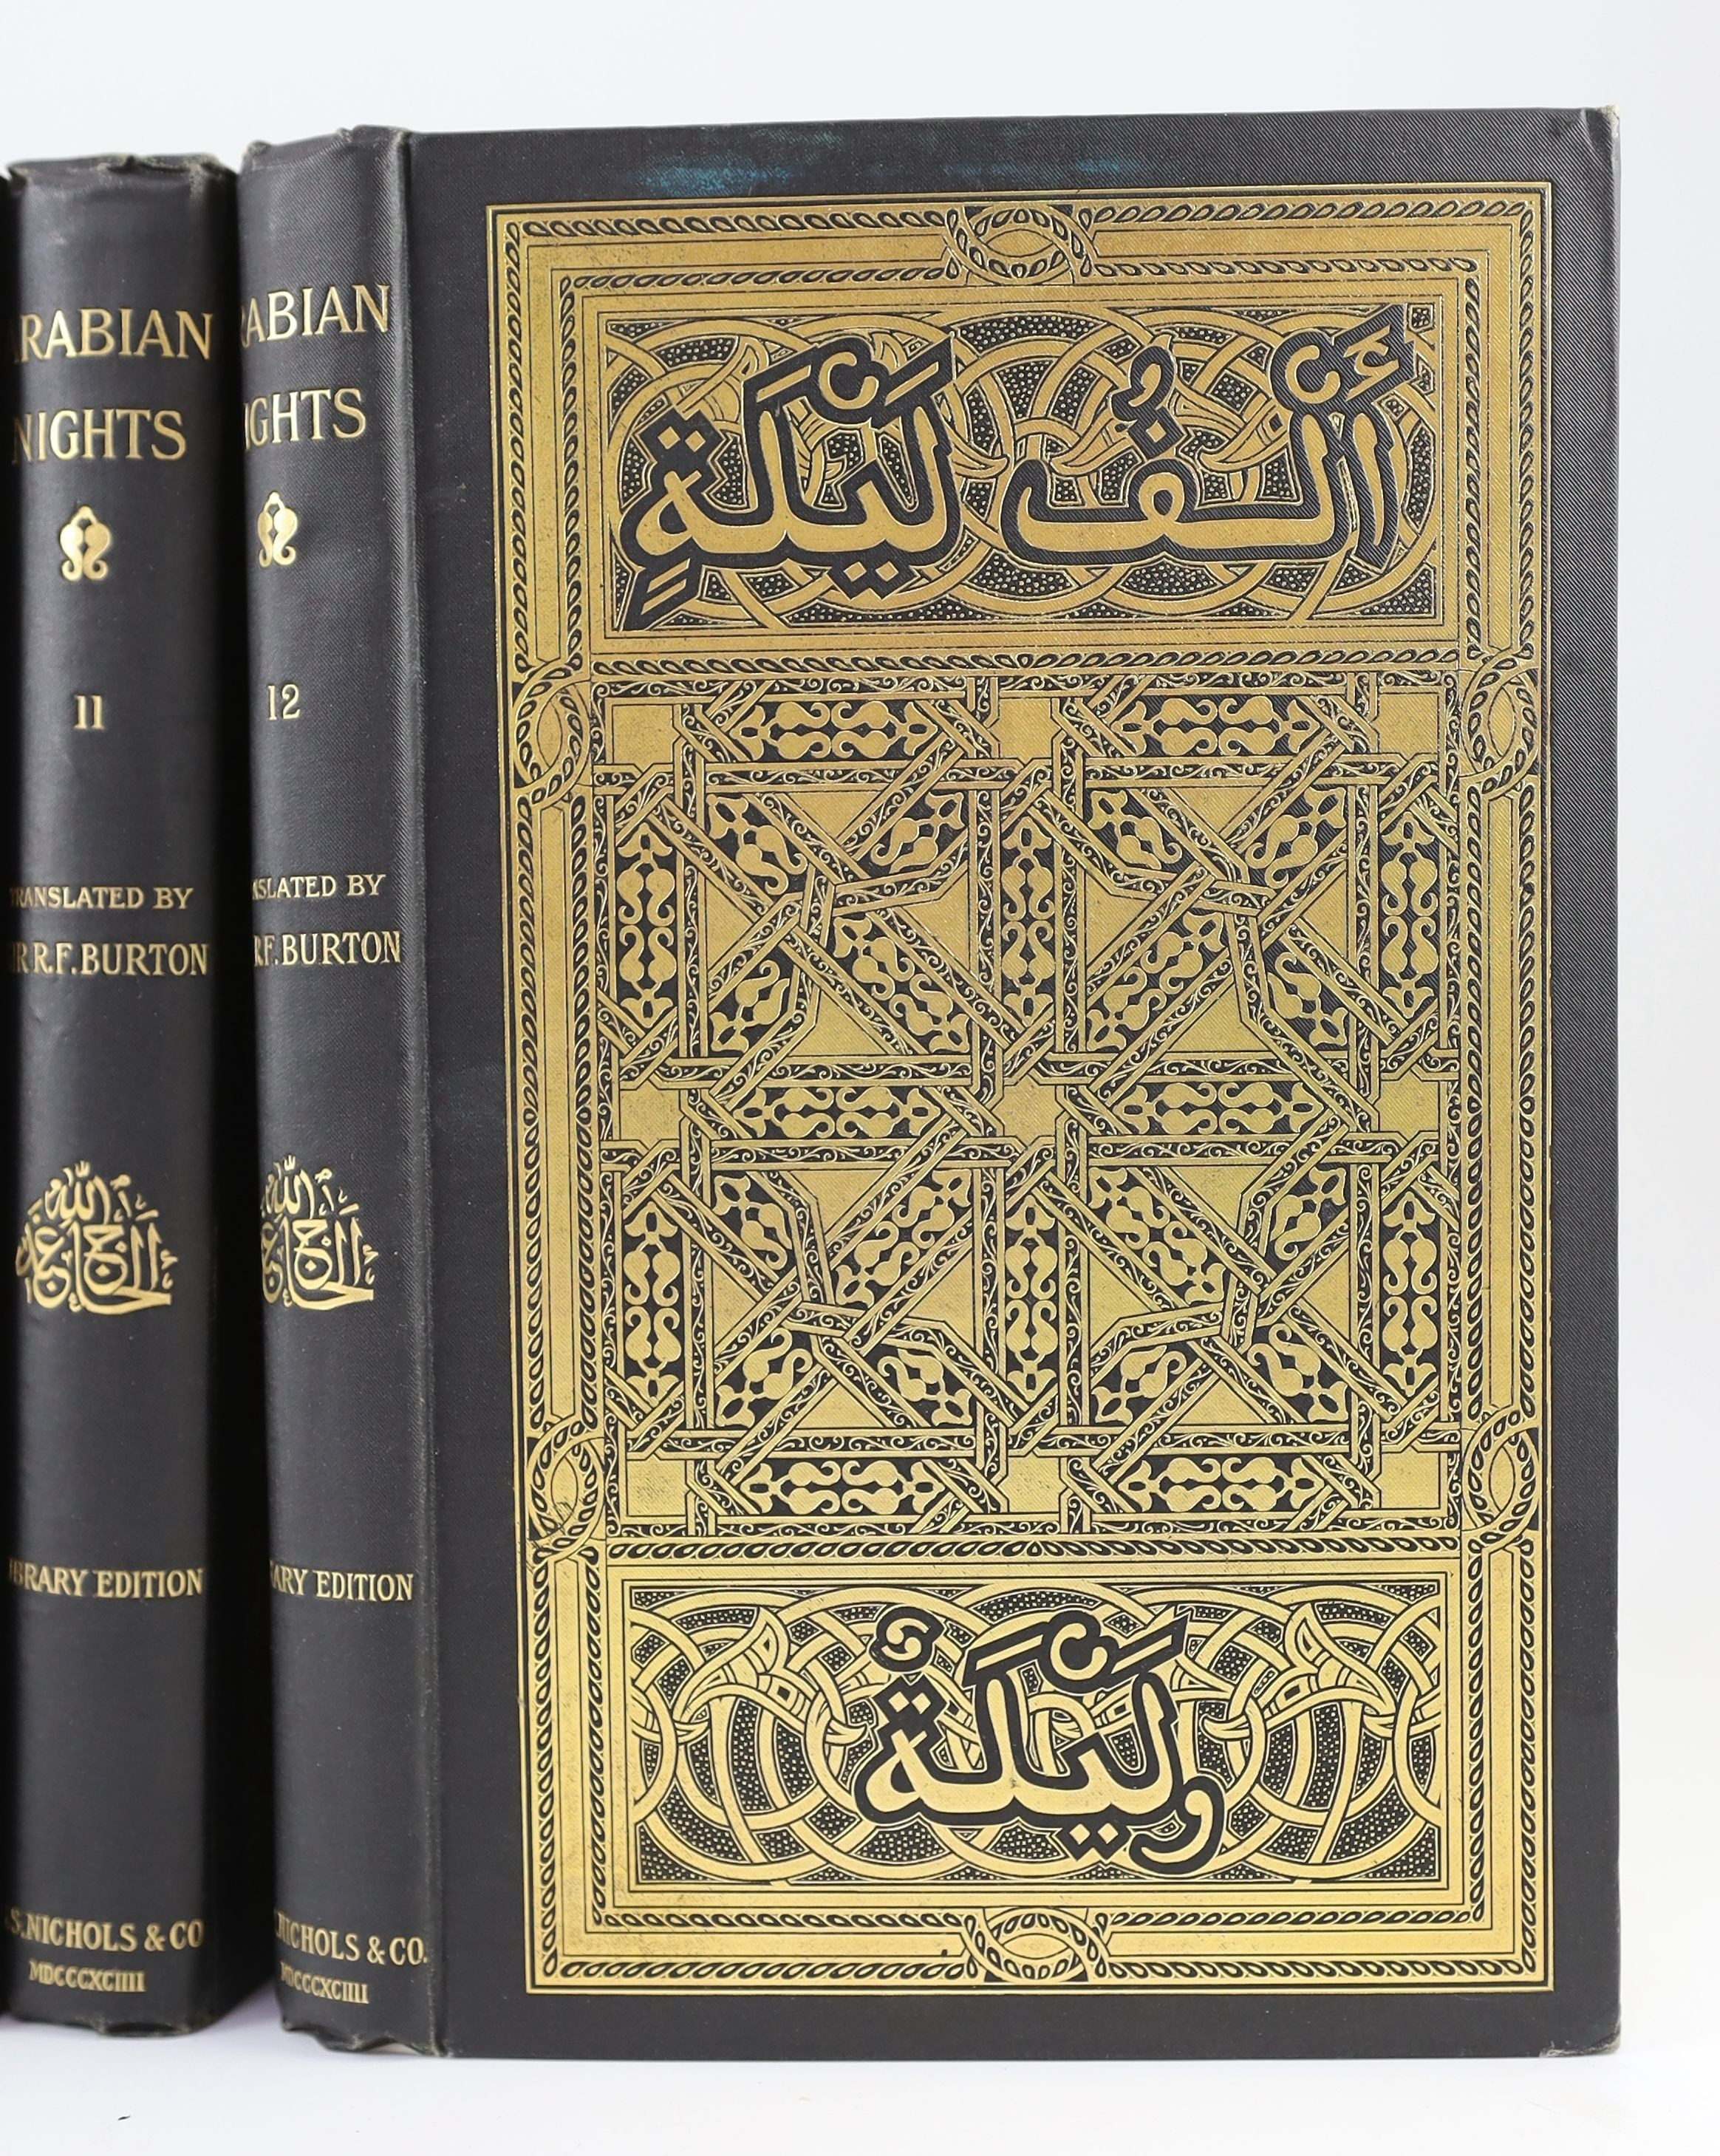 Arabian Nights - The Book of the Thousand Nights and a Night, with Supplemental Nights, Library edition, translated by Sir Richard Burton, 12 vols, 8vo, original cloth, with gilt Arabian design to front boards, contempor